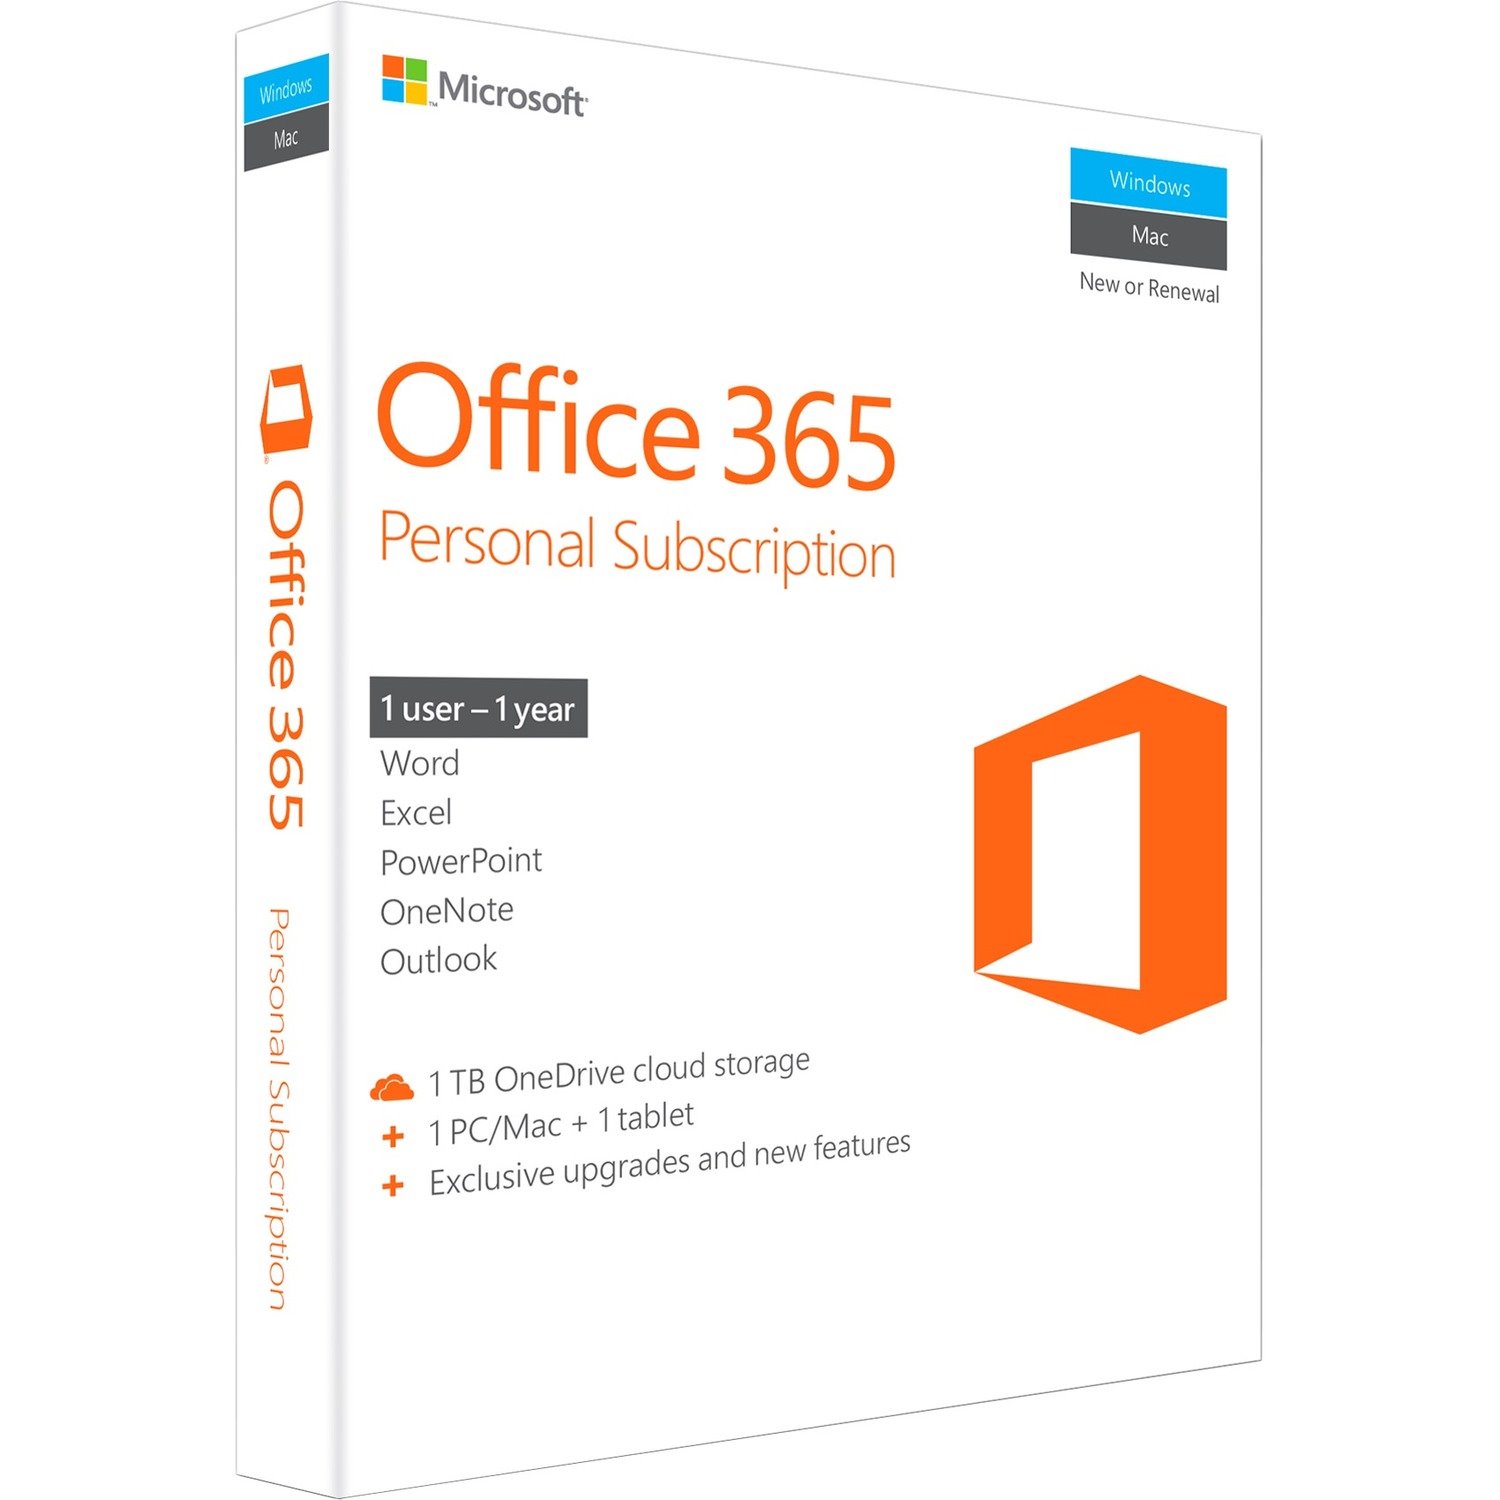 Microsoft Office 365 Personal Subscription + Exclusive upgrades and new features - 1 User, 1 PC/Mac, 1 Tablet, 1 TB OneDrive Cloud Storage - 1 Year